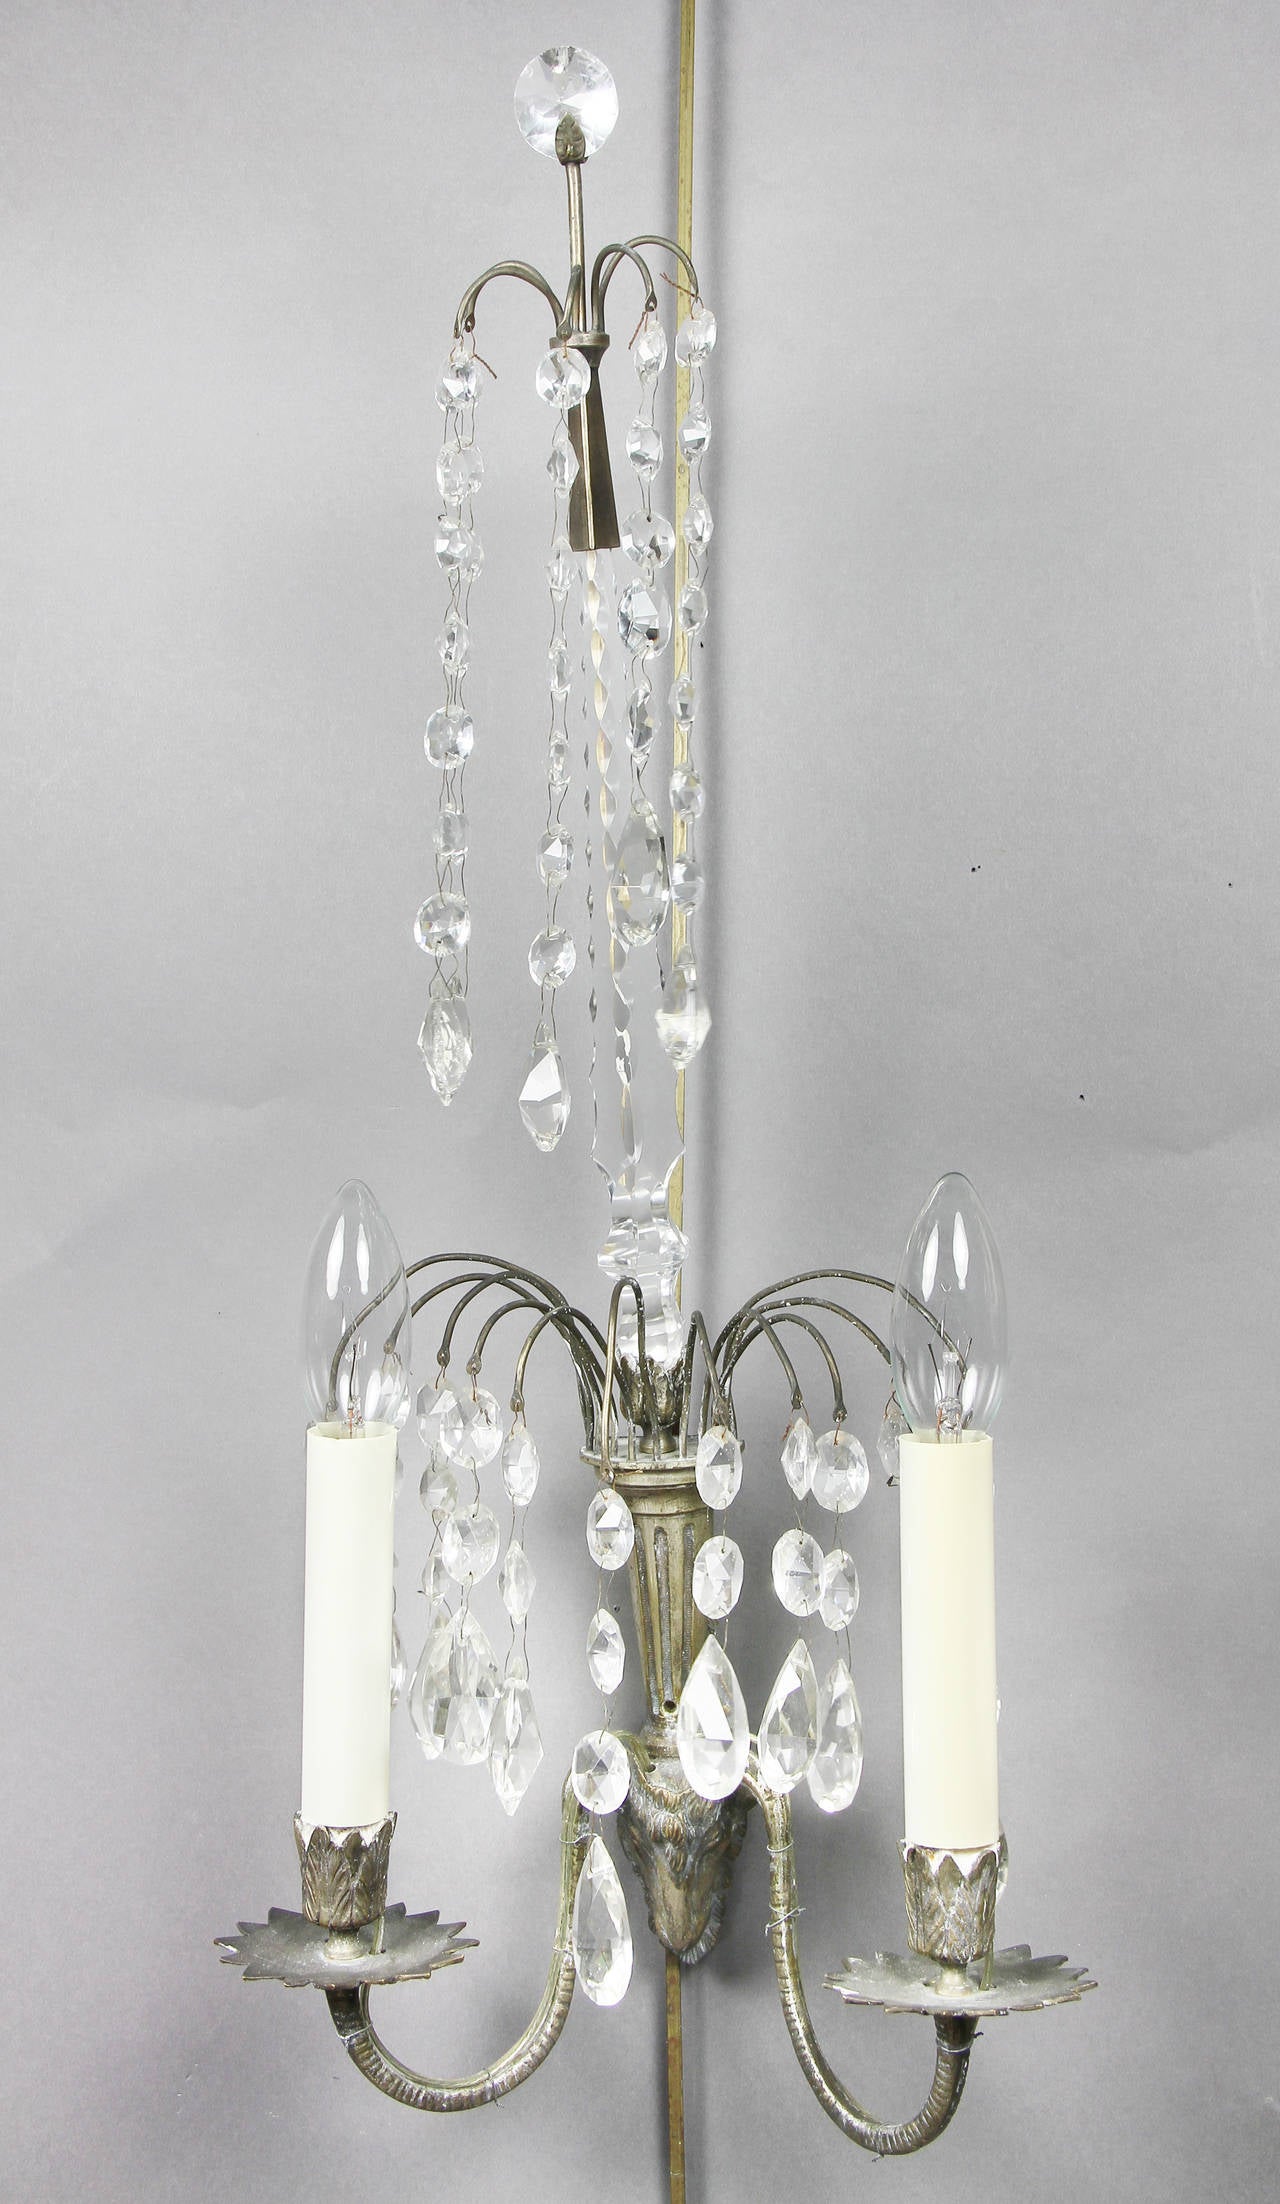 All with circular cut glass finial with a canopy of drops over two arms branching out from a rams head.